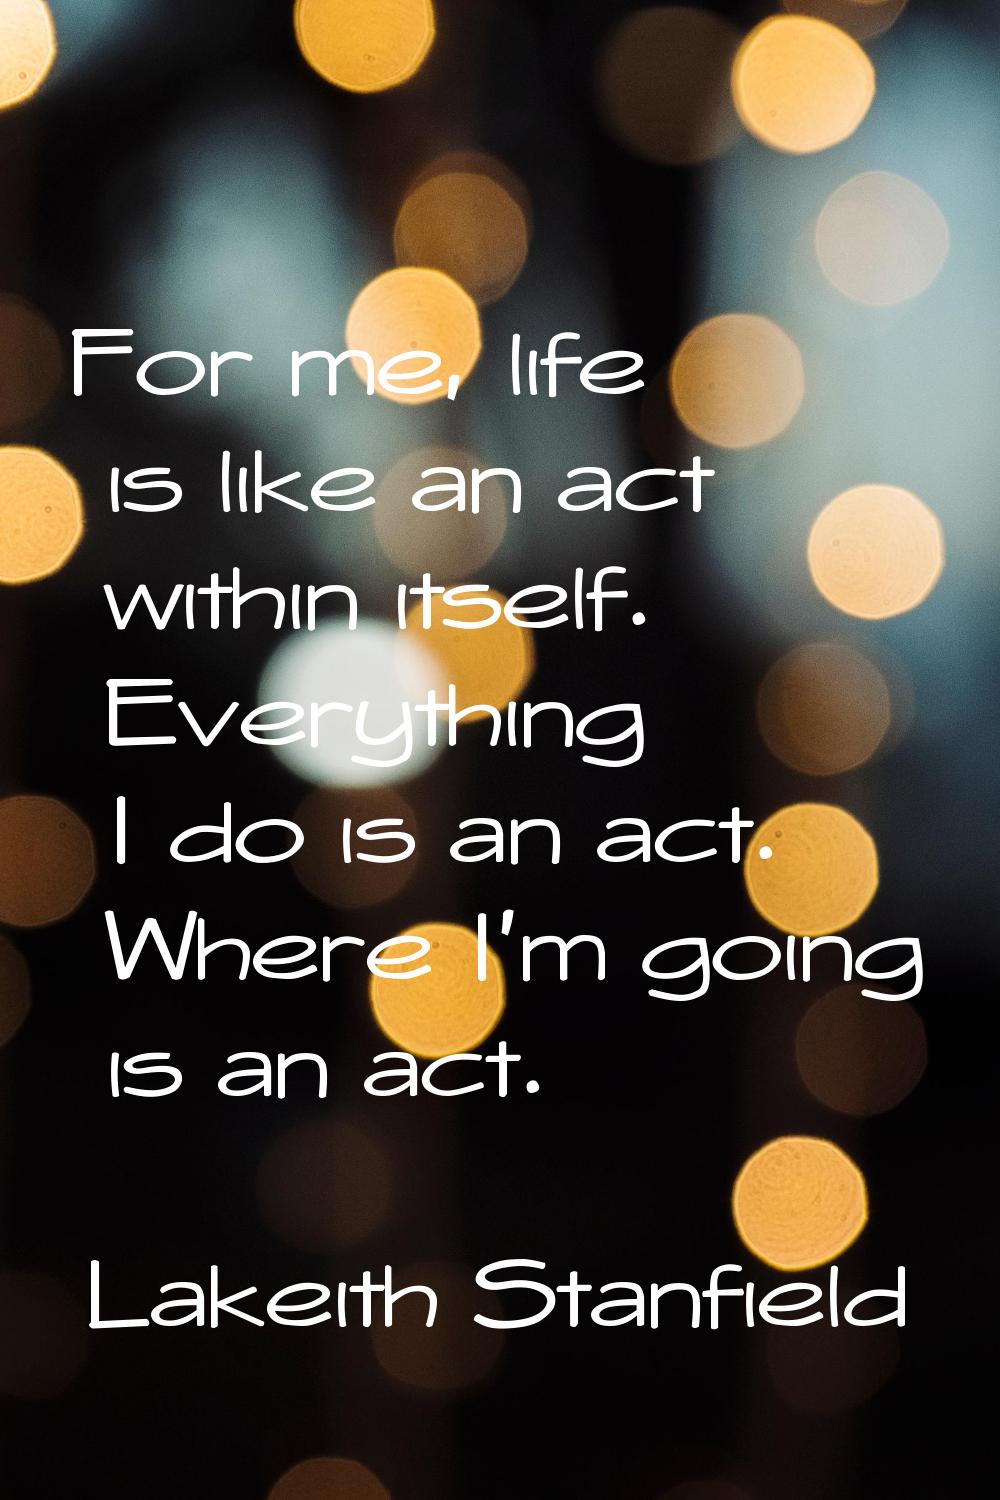 For me, life is like an act within itself. Everything I do is an act. Where I'm going is an act.